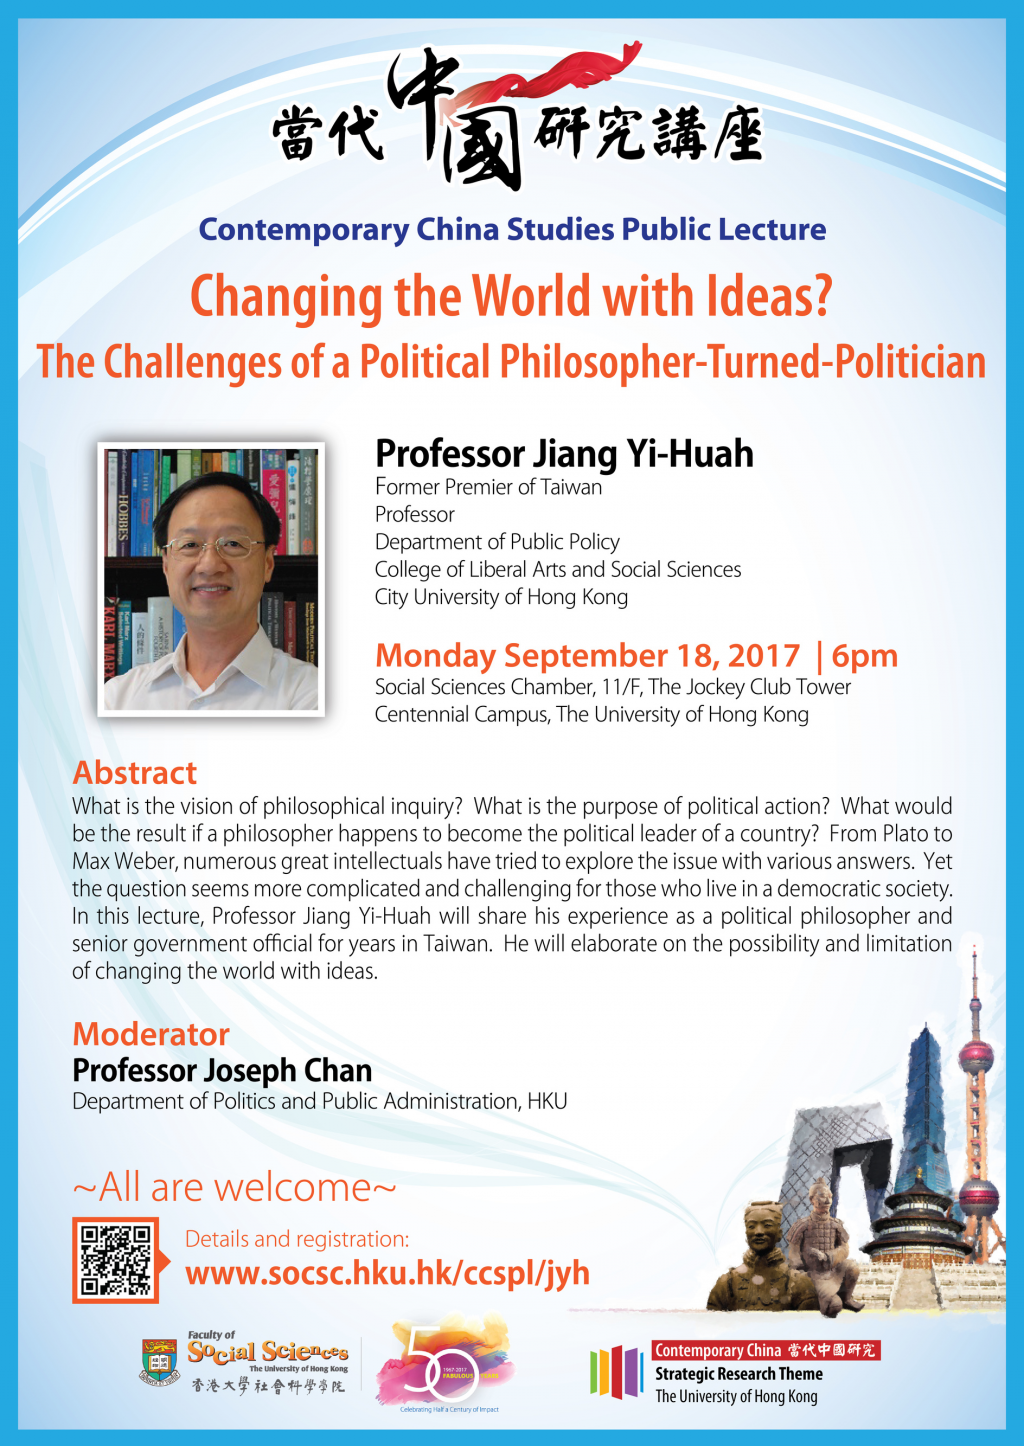 Changing the World with Ideas? The Challenges of a Political Philosopher-Turned-Politician